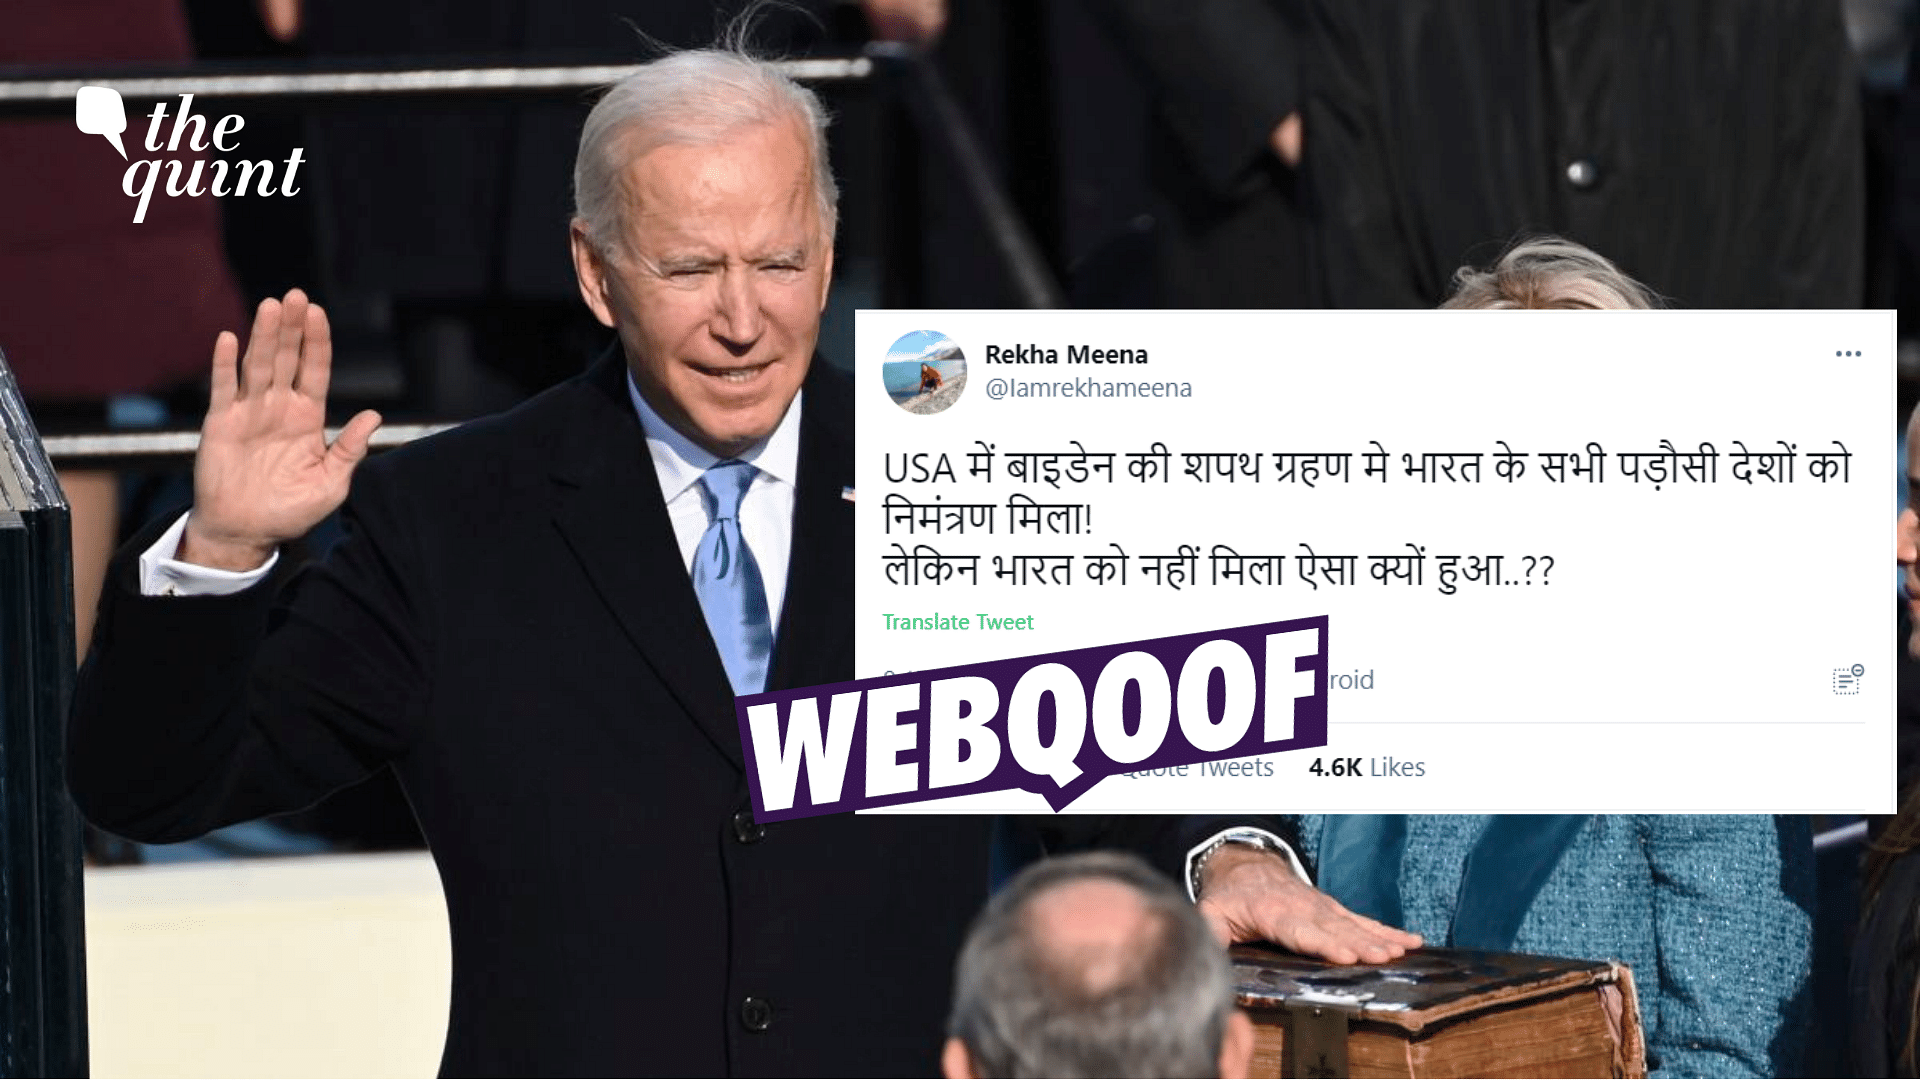 Fact-check on India in Biden’s Inauguration.